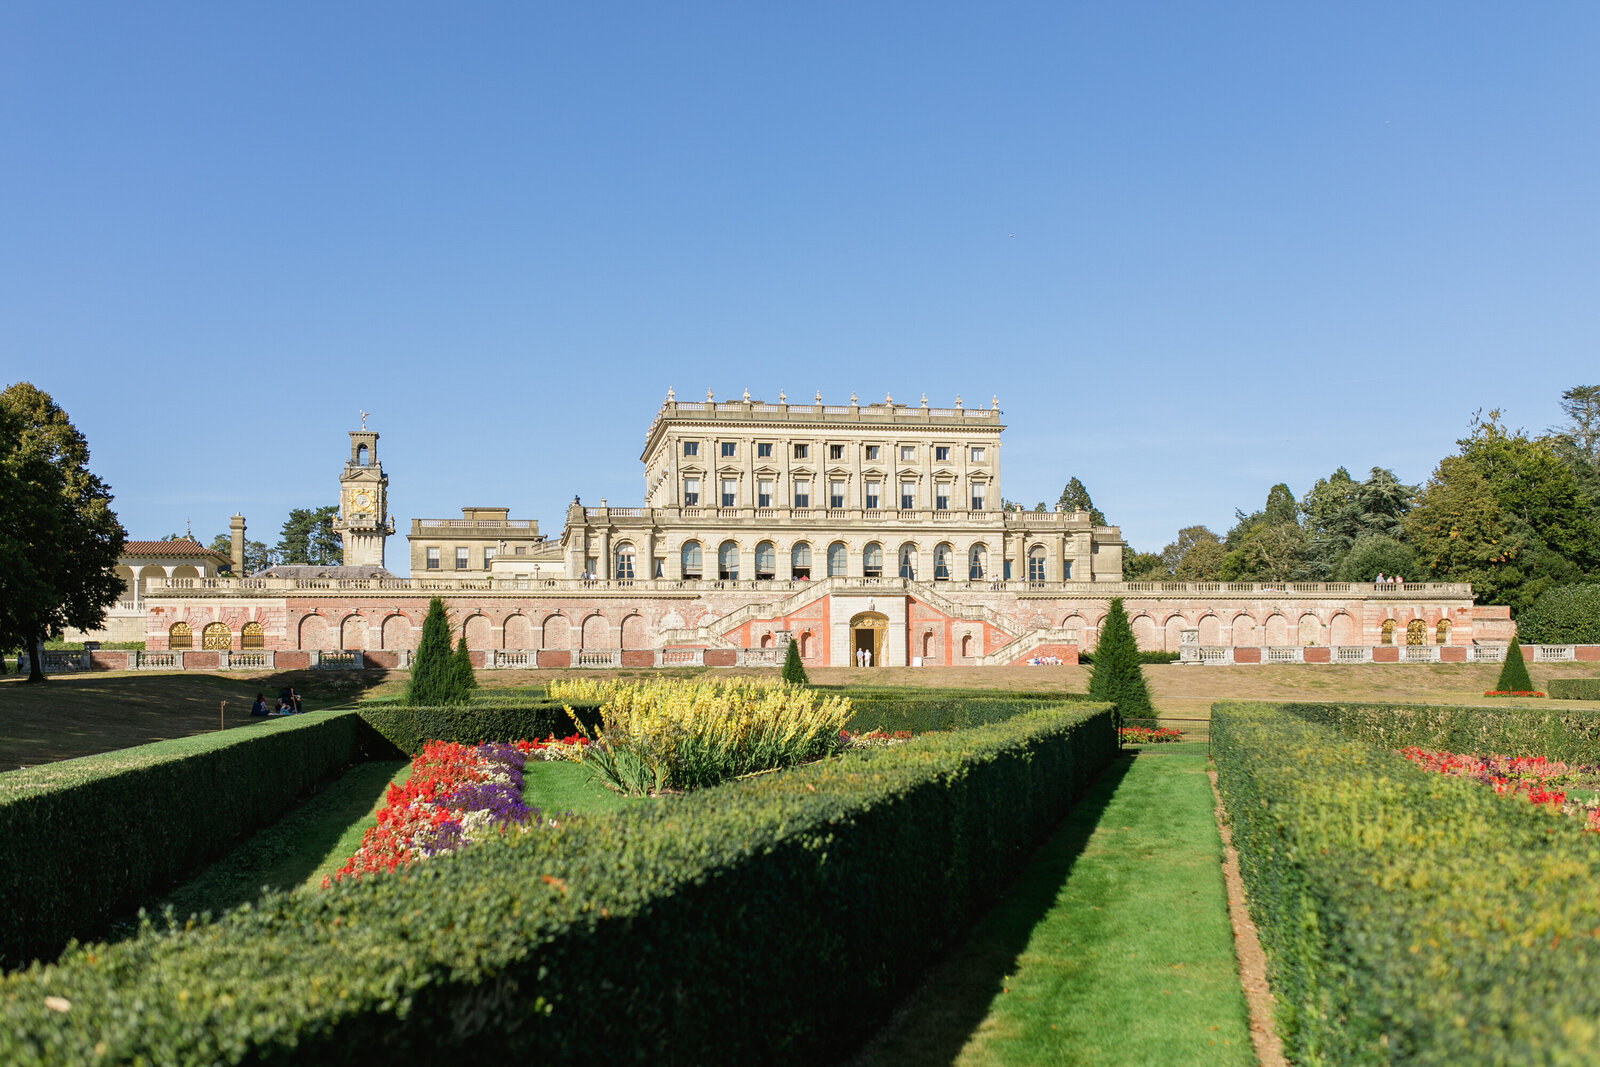 Cliveden House a wedding venue in Buckinghamshire England